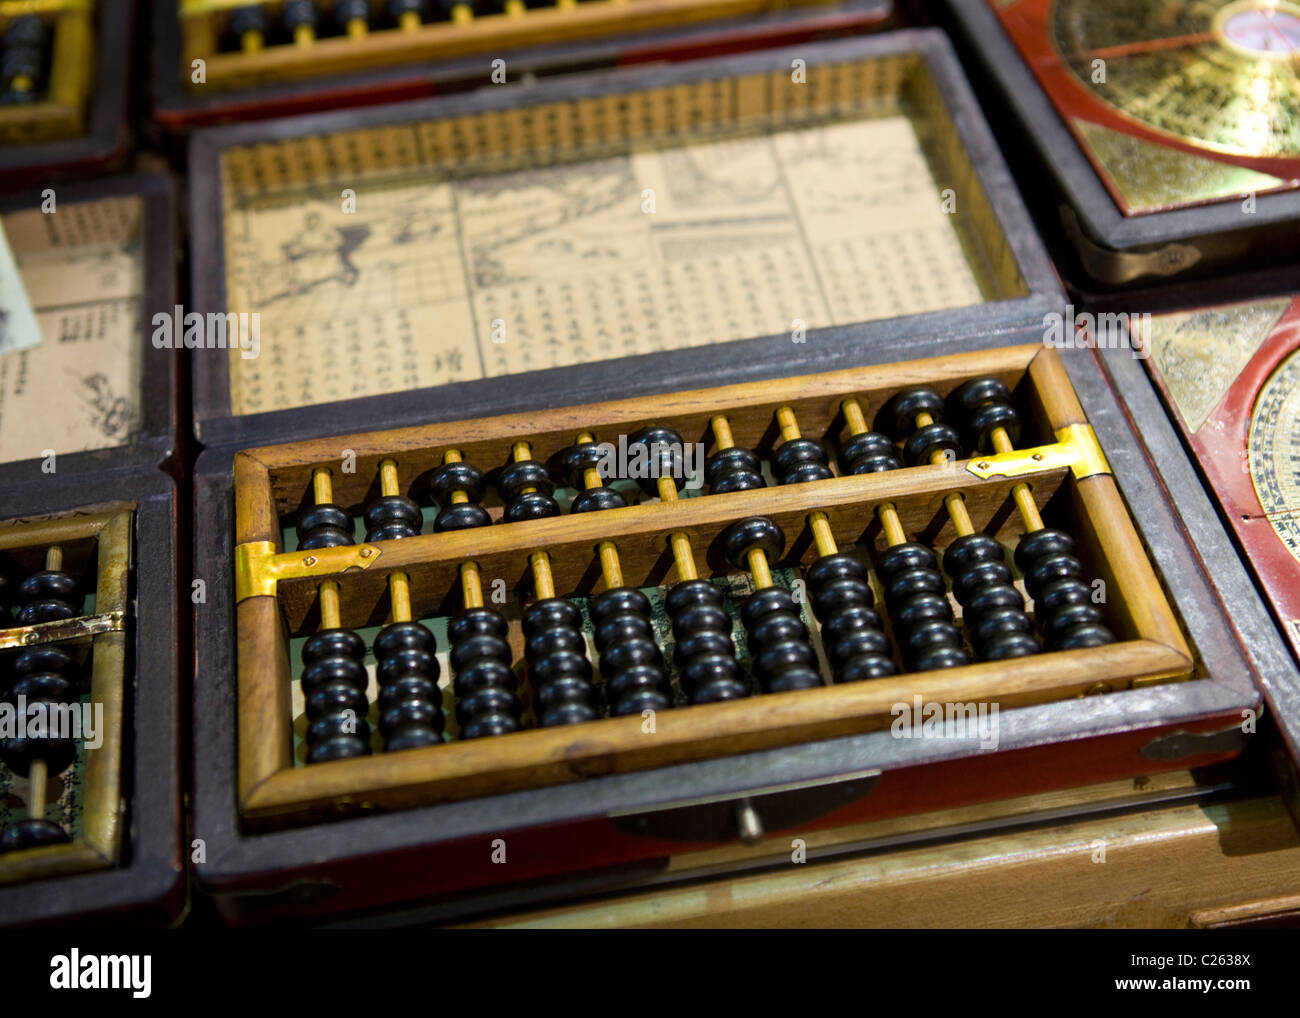 Chinese abacus in wooden box Stock Photo